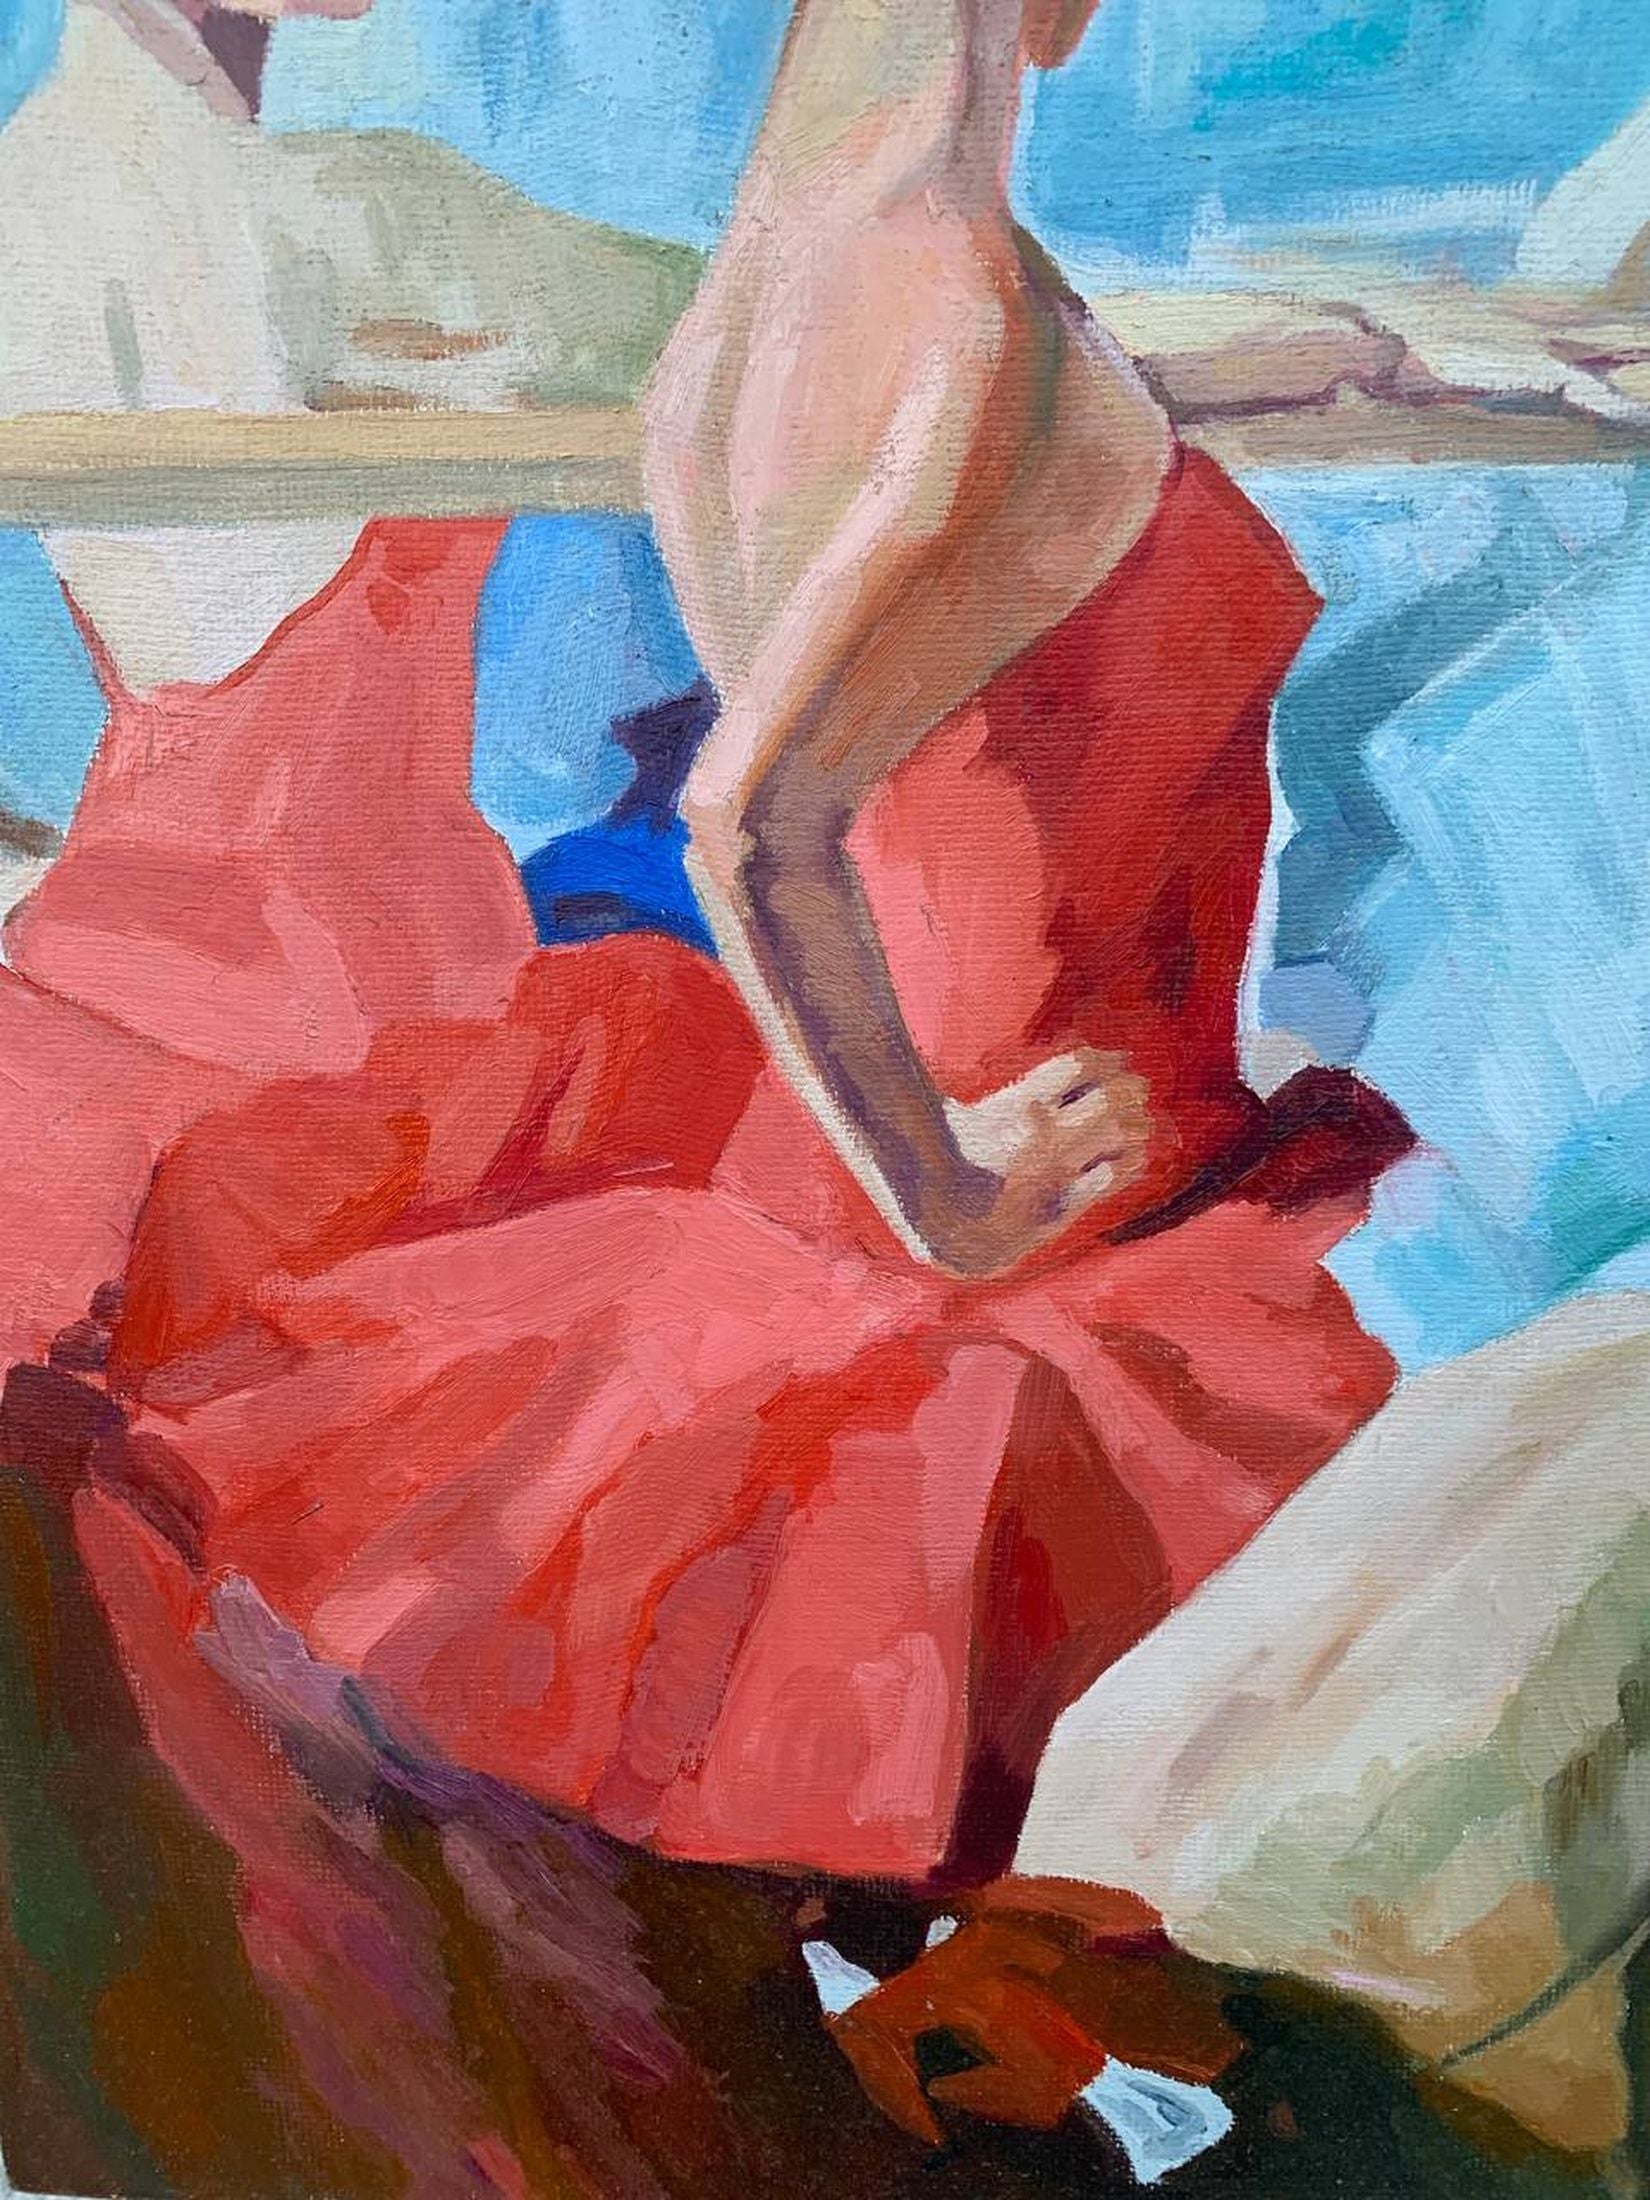 The fluid movements of ballet dancers are captured in L.K.'s oil painting